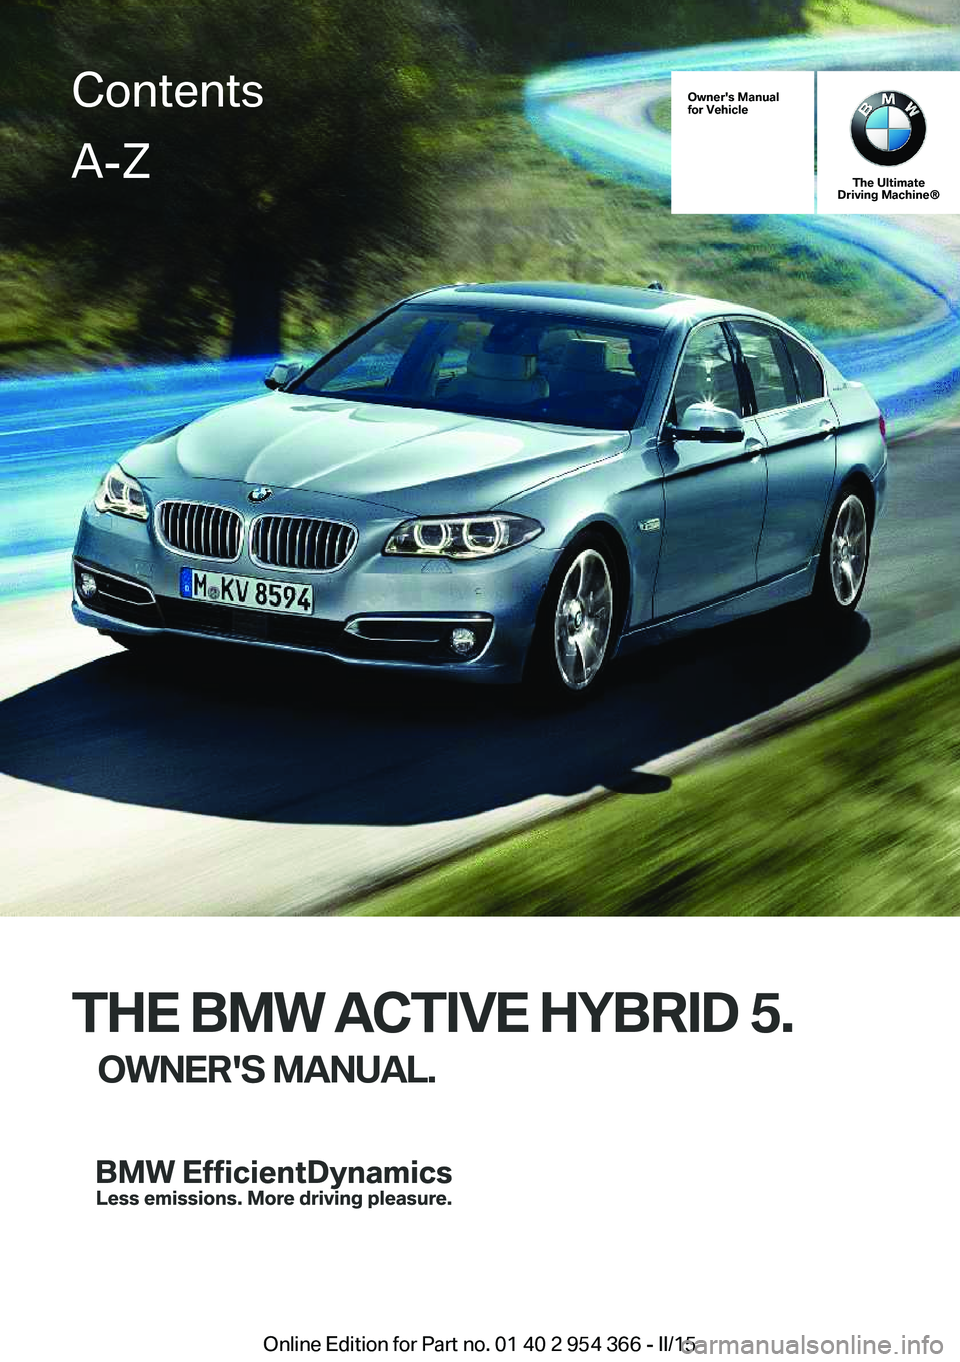 BMW 5 SERIES ACTIVE HYBRID 2015  Owners Manual Owner's Manual
for Vehicle
The Ultimate
Driving Machine®
THE BMW ACTIVE HYBRID 5.
OWNER'S MANUAL.
ContentsA-Z
Online Edition for Part no. 01 40 2 954 366 - II/15   